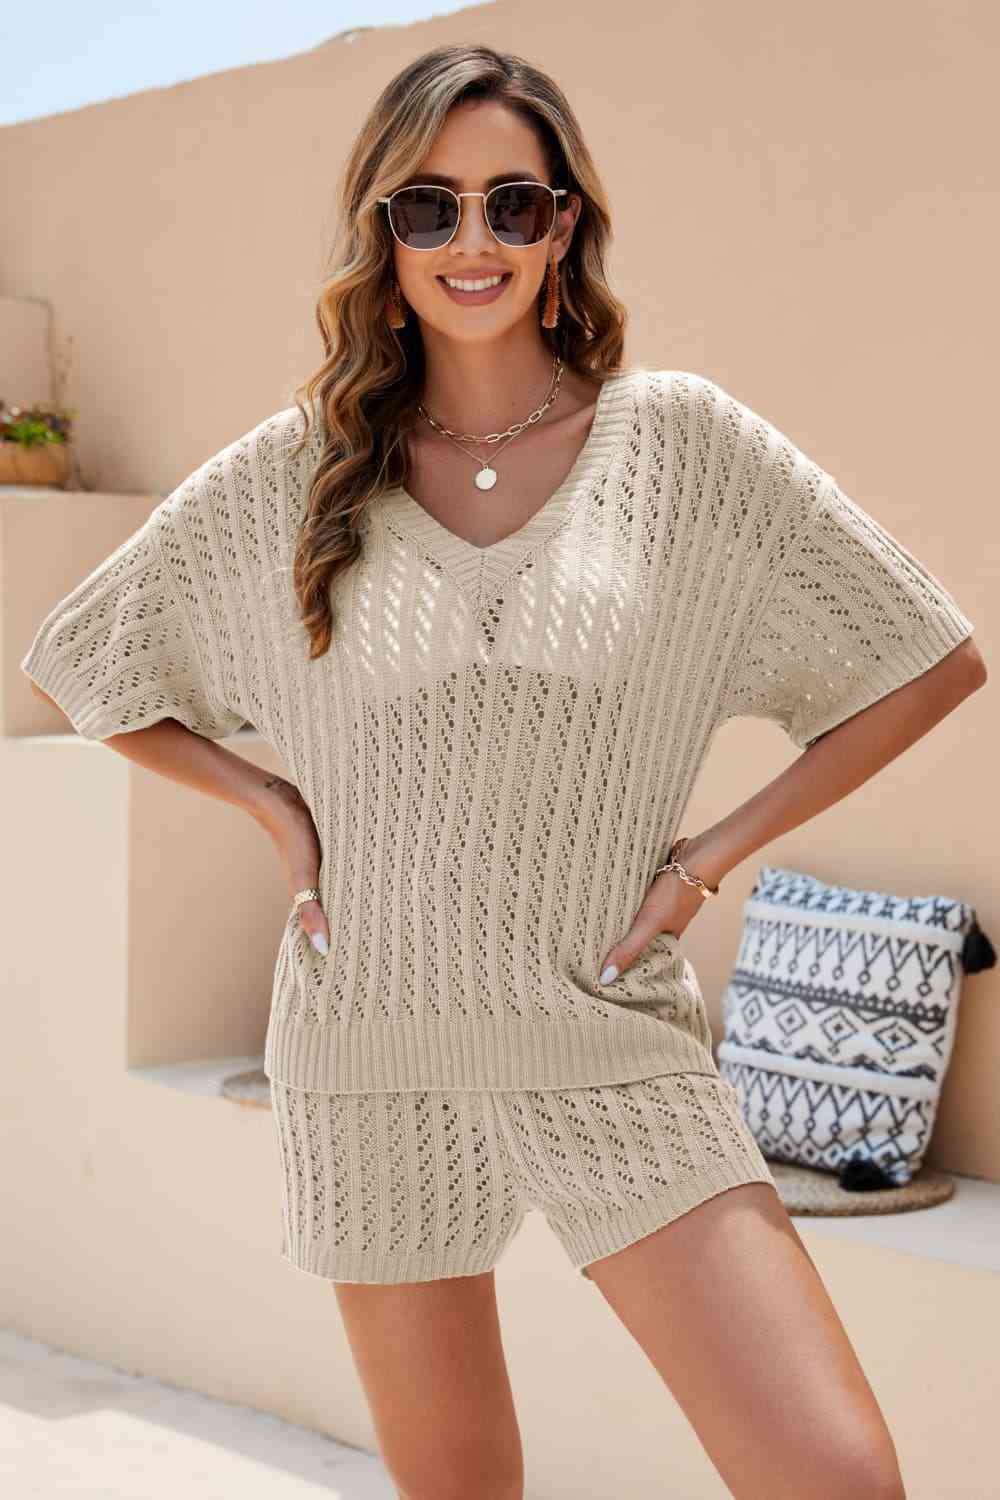 Women's Openwork V-Neck Top and Shorts Set